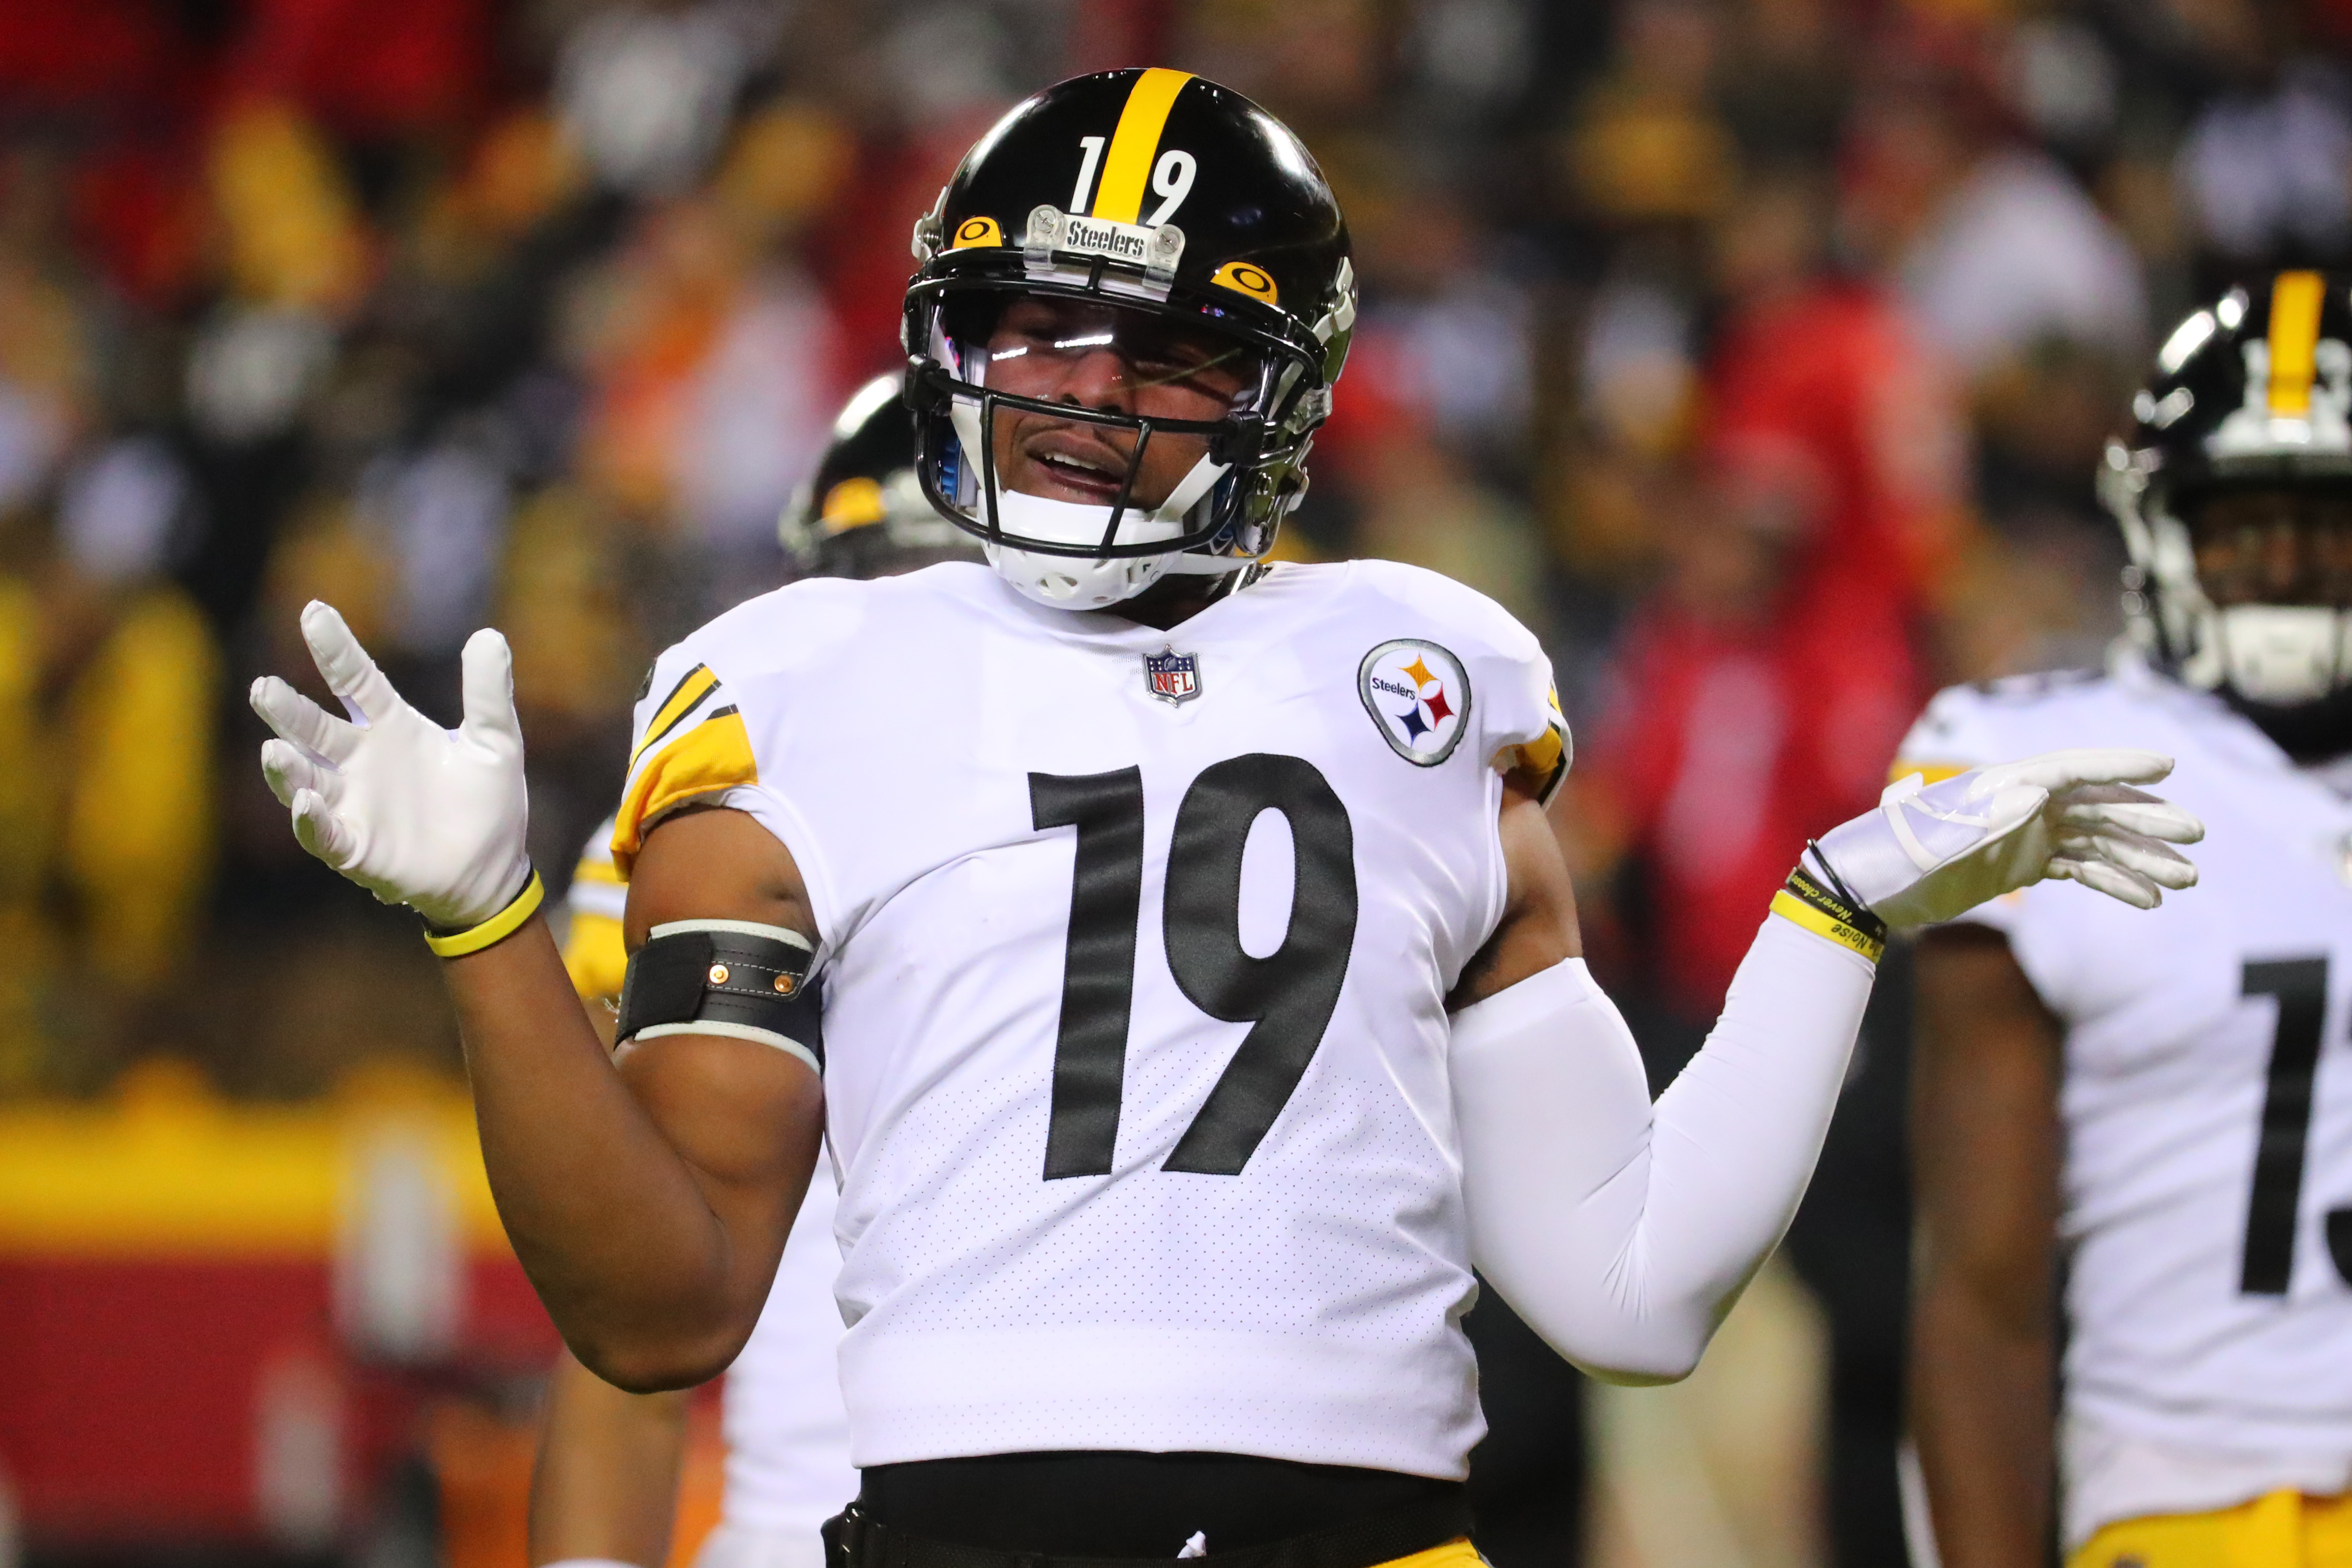 JuJu Smith-Schuster #19 of the Pittsburgh Steelers warms up before the game against the Kansas City Chiefs in the NFC Wild Card Playoff game at Arrowhead Stadium on January 16, 2022 in Kansas City, Missouri.